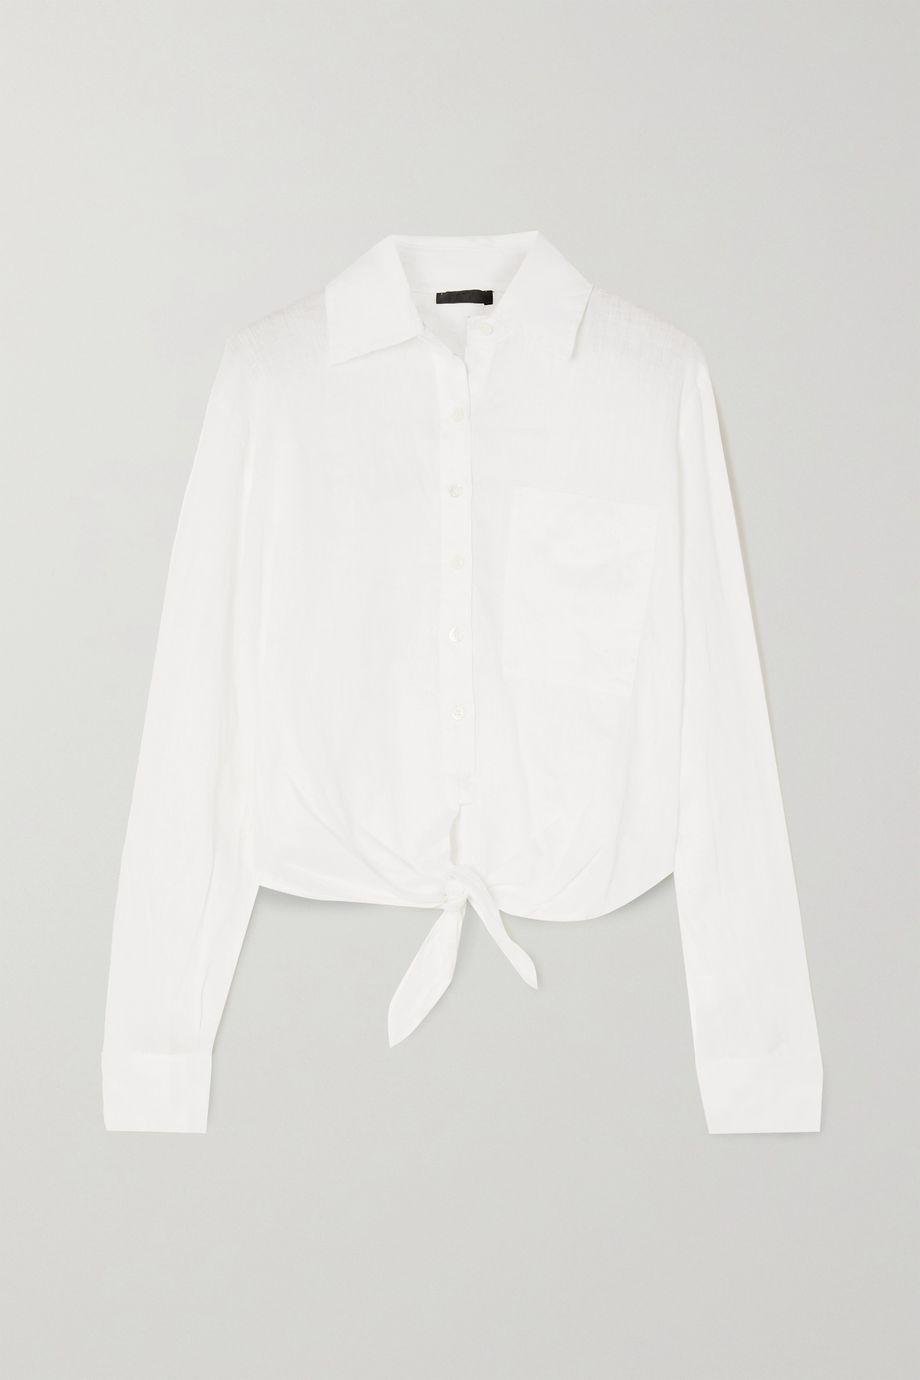 Cropped tie-front linen shirt by ATM ANTHONY THOMAS MELILLO